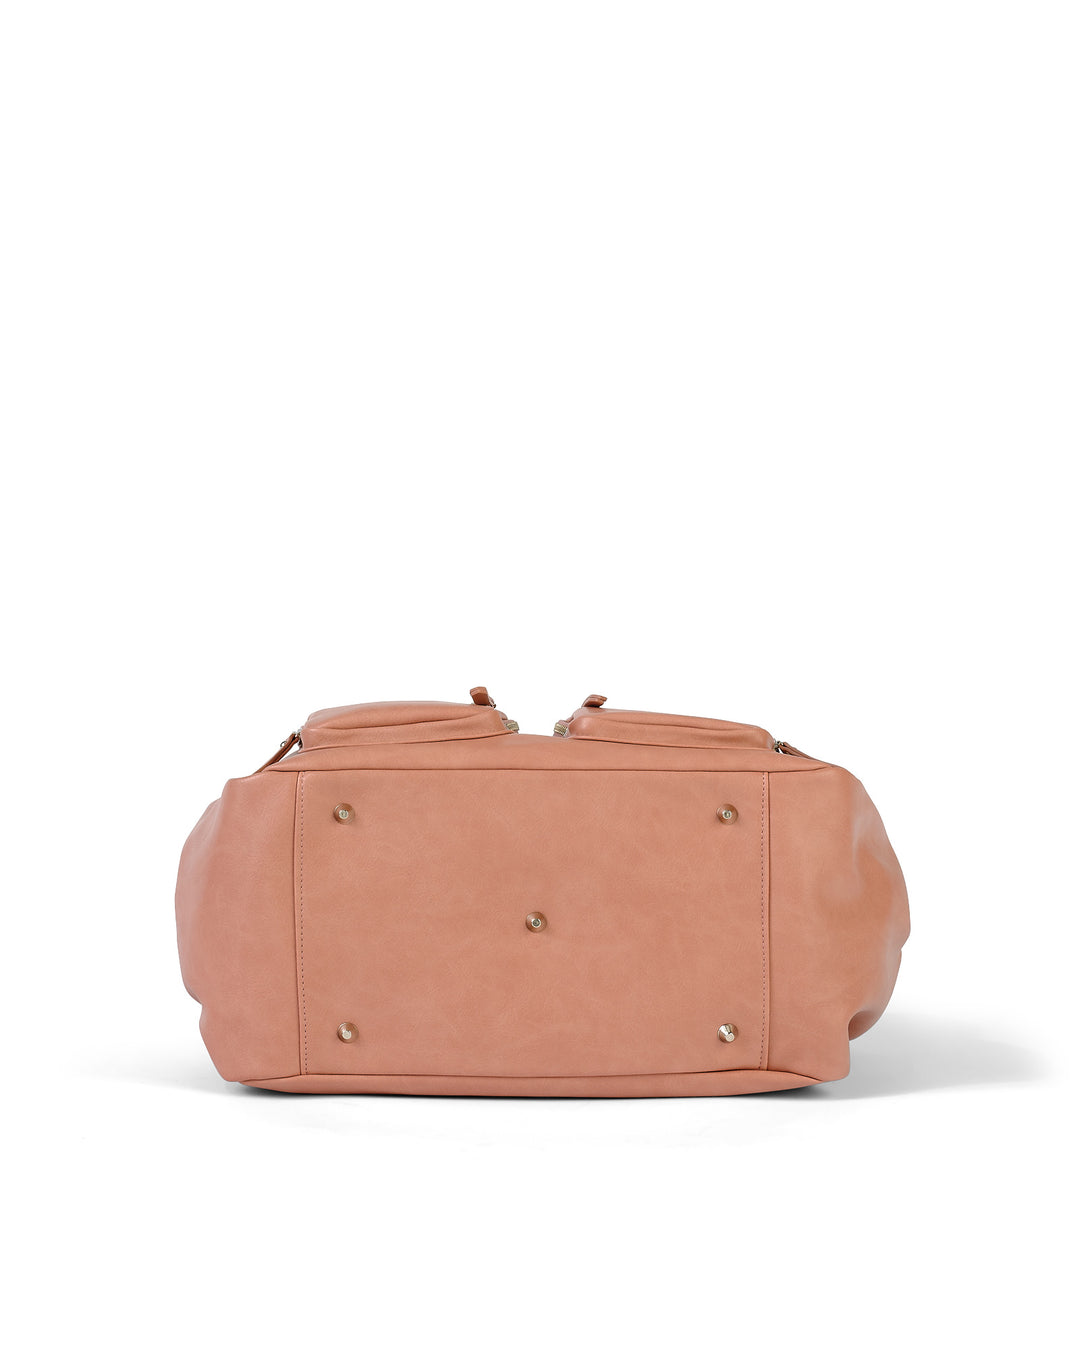 OiOi Carry All Nappy Bag - Dusty Rose